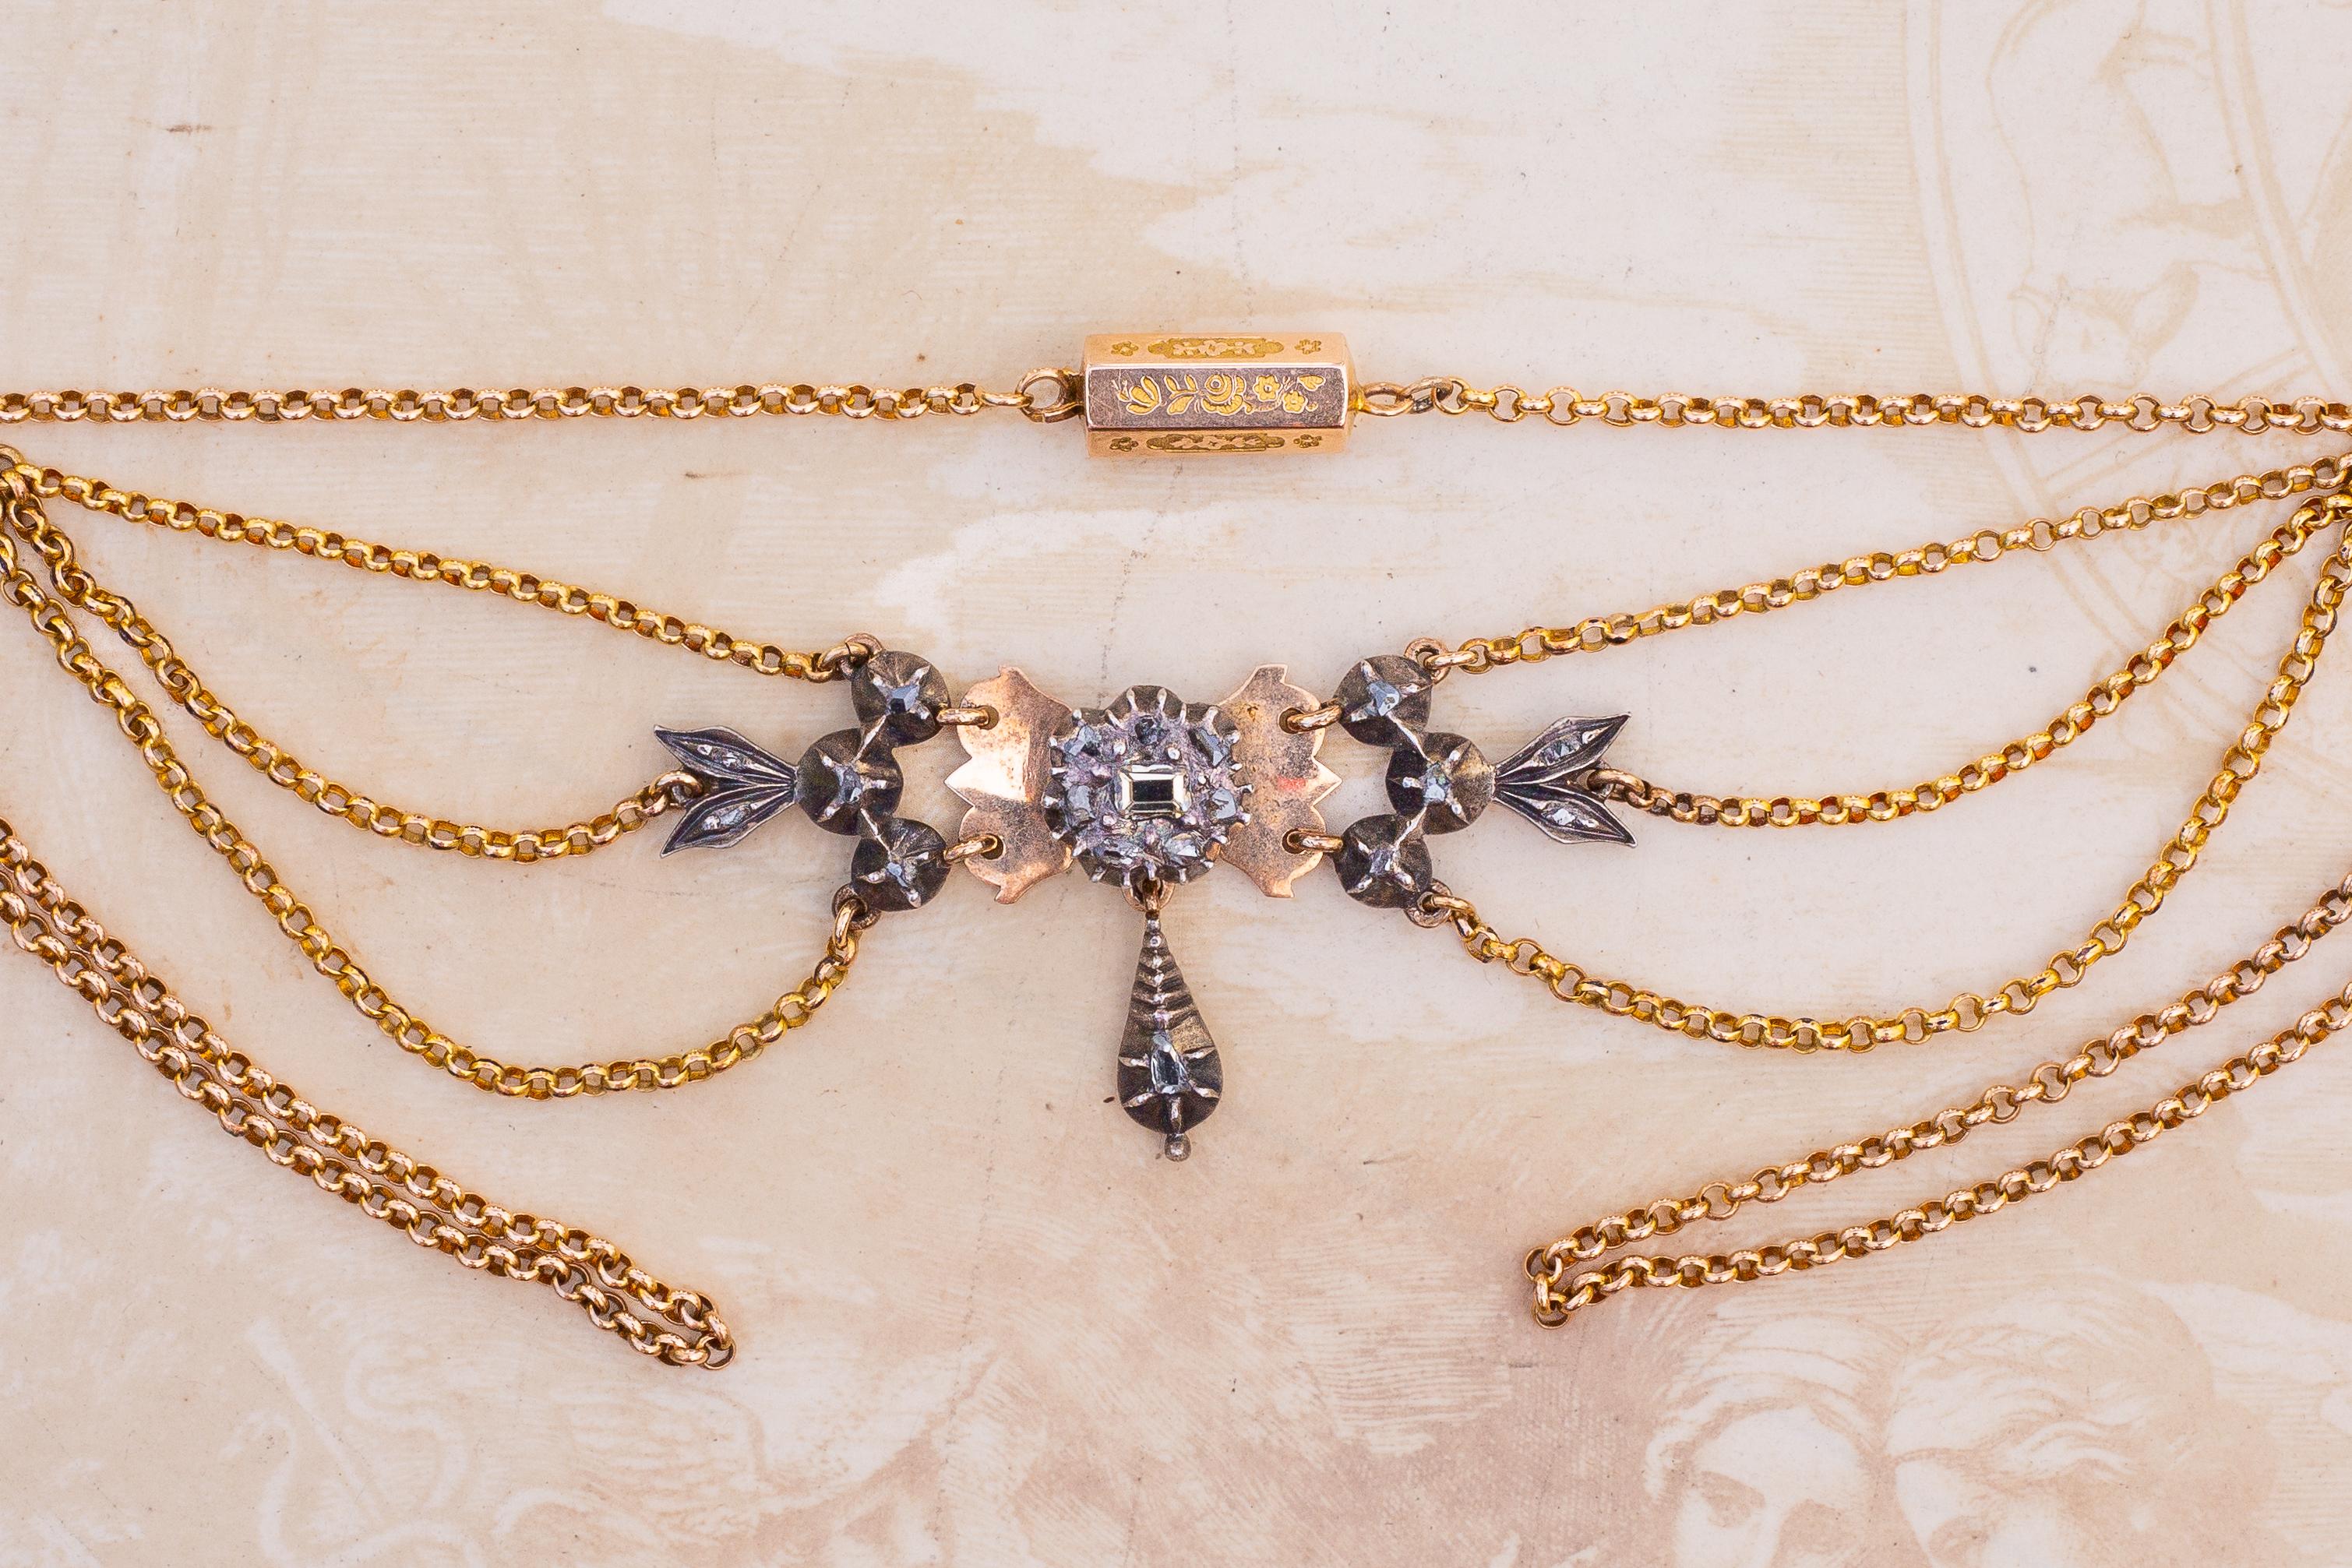 A fantastic French antique 18K gold and silver drapery necklace with rose cut and table cut diamonds. This necklace is an excellent example of French provincial craftsmanship from the region of Arles, Provence and dates to the early 19th